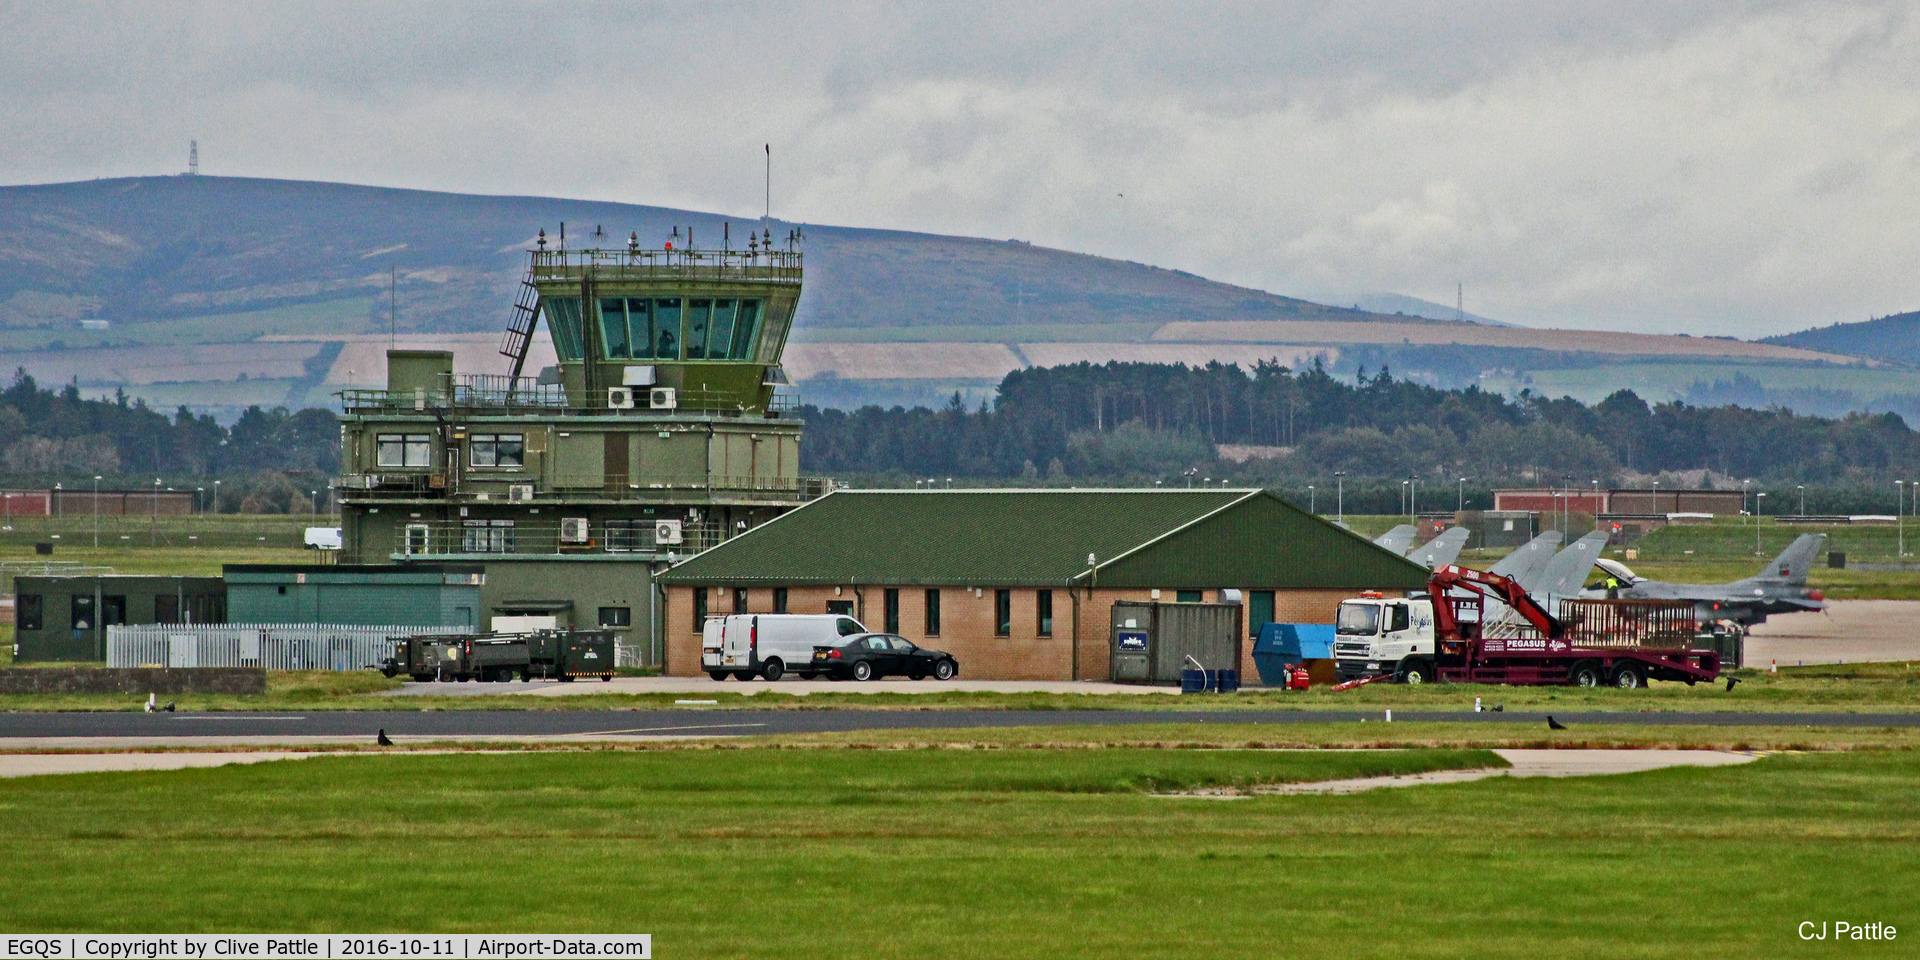 RAF Lossiemouth Airport, Lossiemouth, Scotland United Kingdom (EGQS) - Air Traffic Tower at RAF Lossiemouth EGQS during Exercise Joint Warrior 16-2